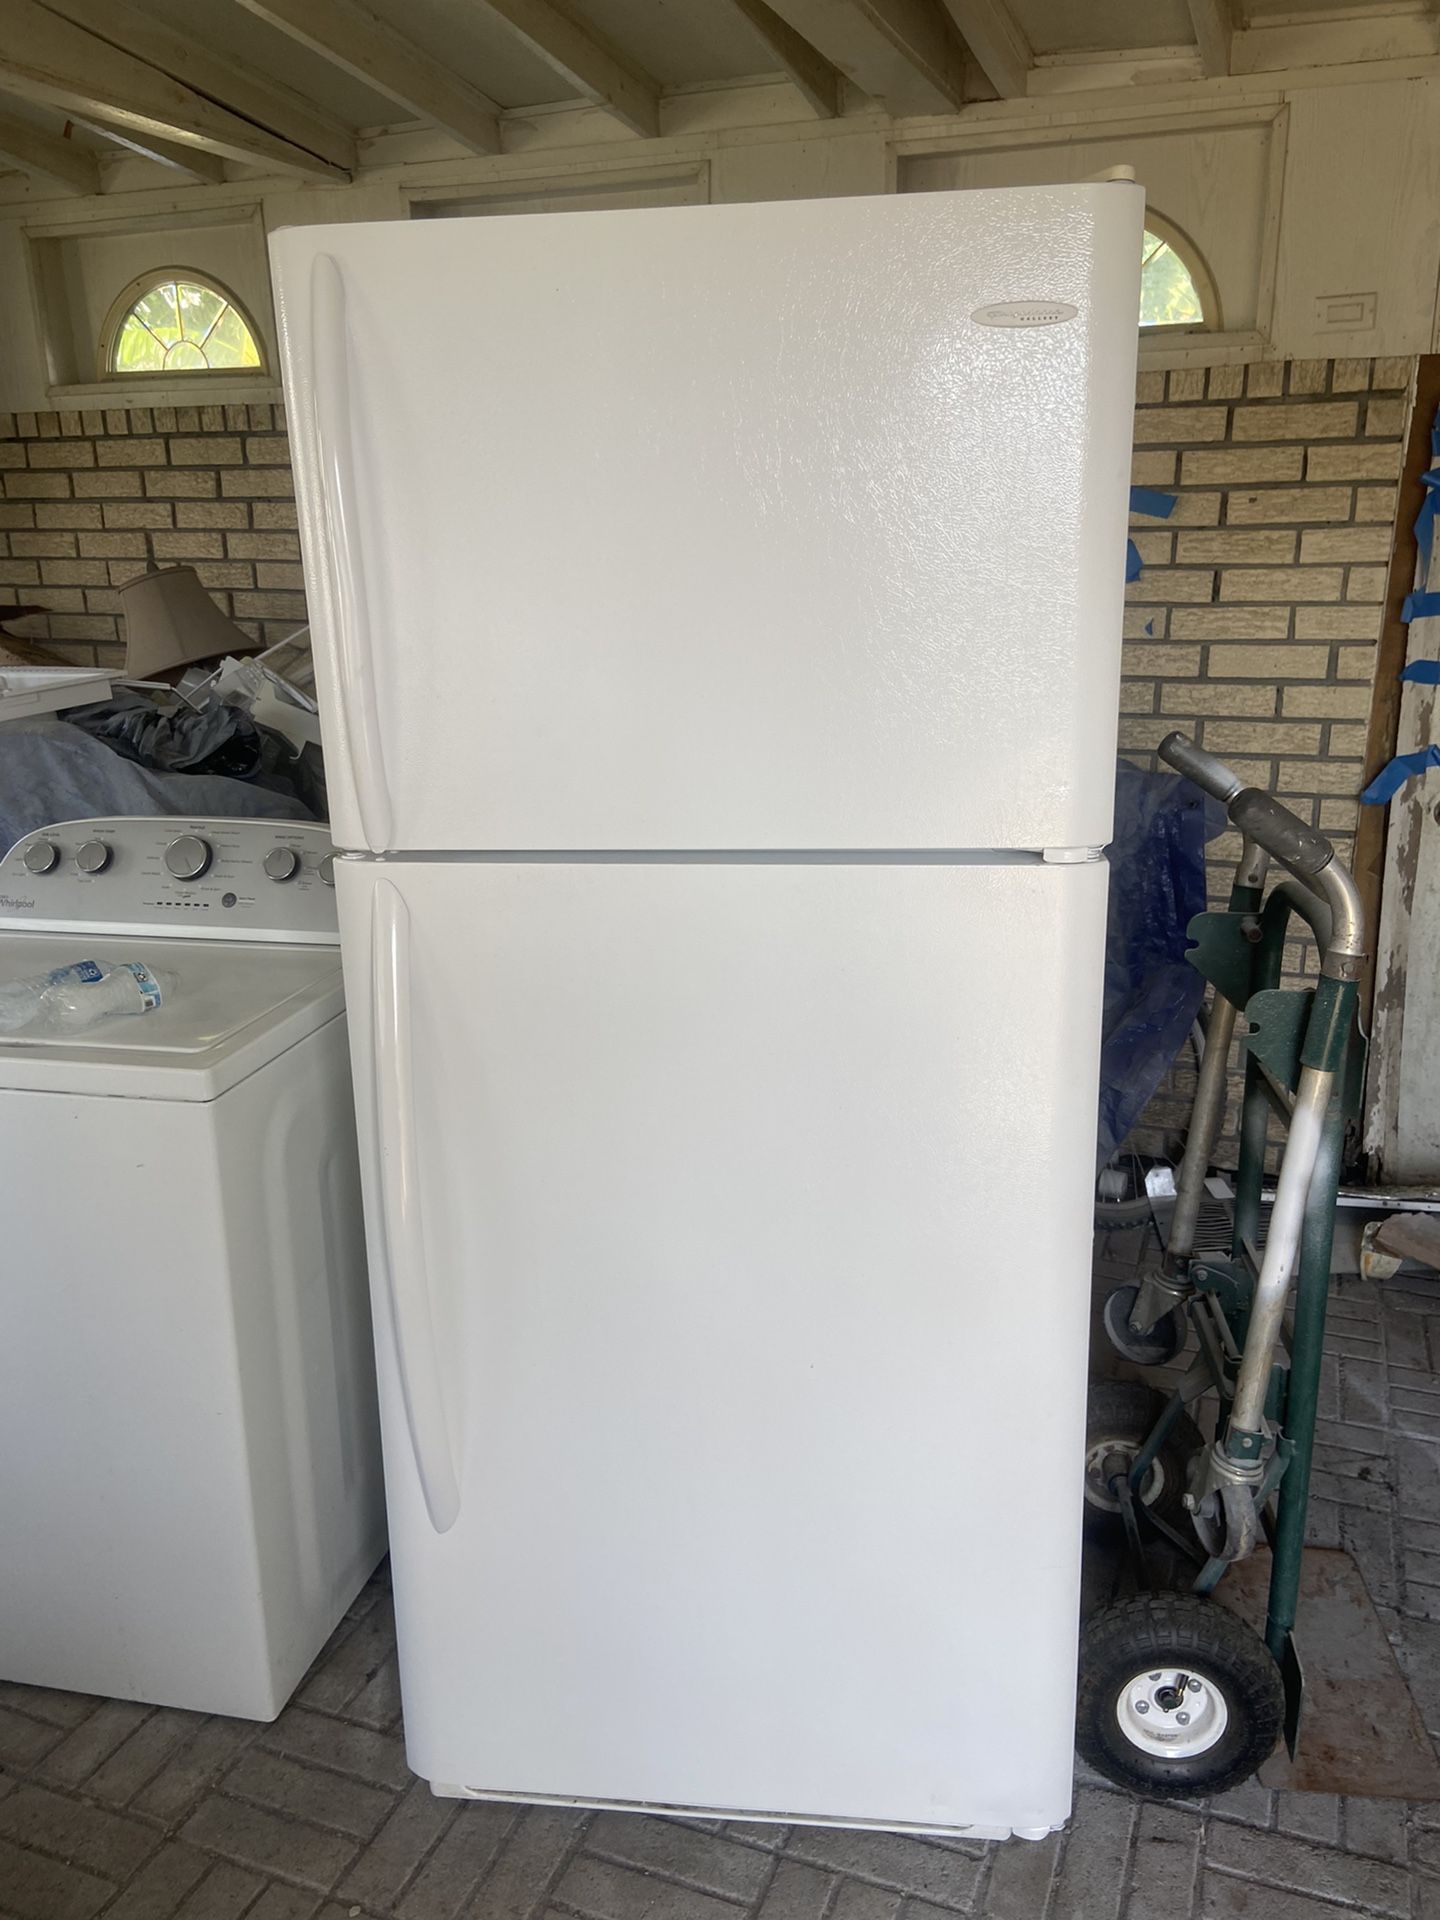 WHITE  FRIDGIDAIRE GALLERY FRIDGE. RUNS LIKE BRAND NEW, 21 CU. FT. NOTHING MISSING. NO ISSUES WITH IT. HAS ALL  GREAT RUBBER DOOR SEALS. BEEN CLEANED 